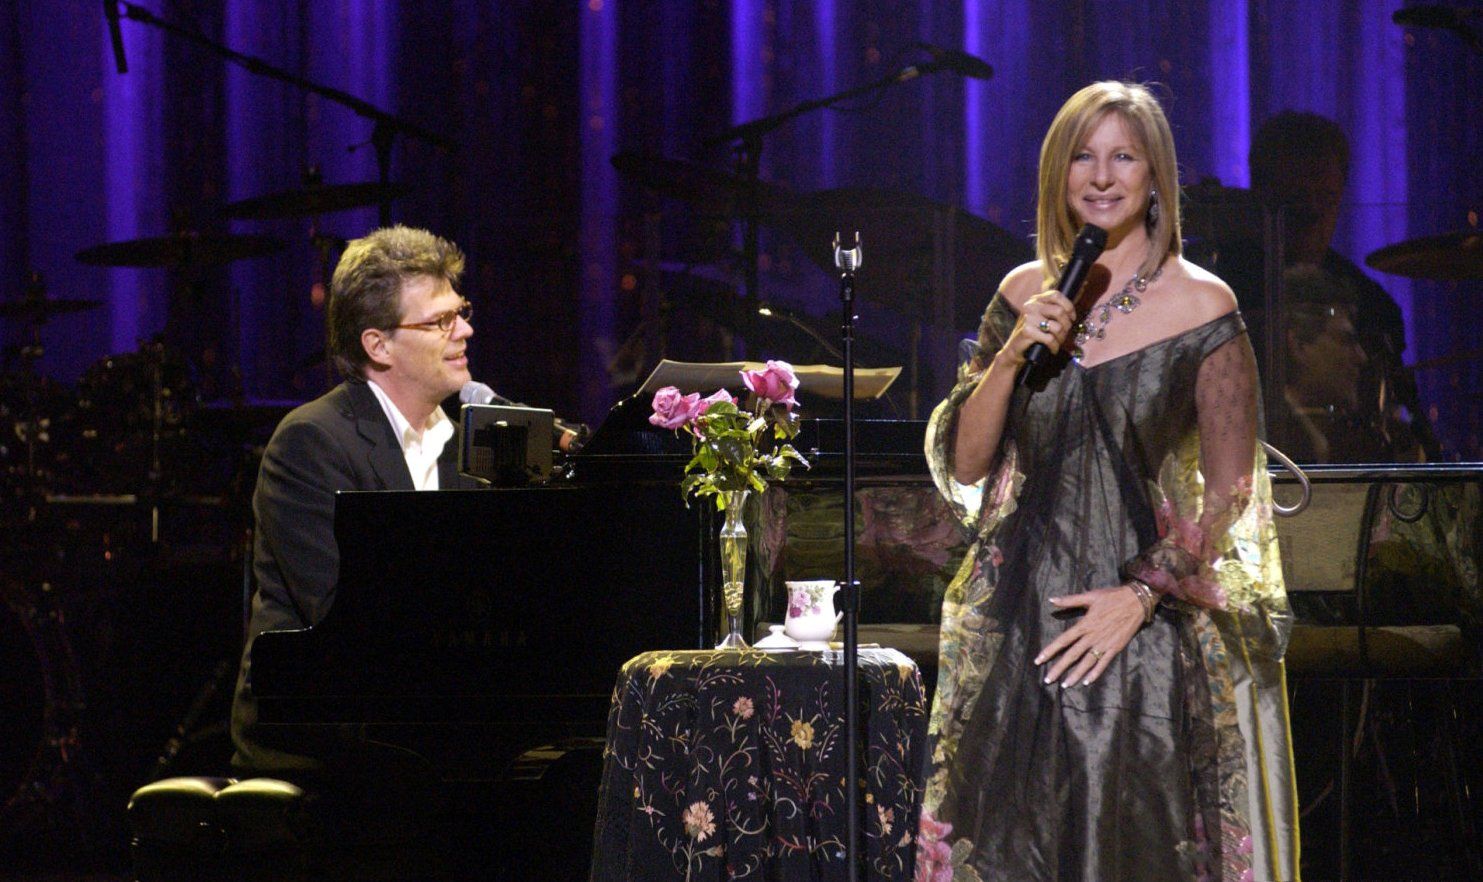 David Foster plays piano for Streisand onstage at the Democratic Gala, 2002.